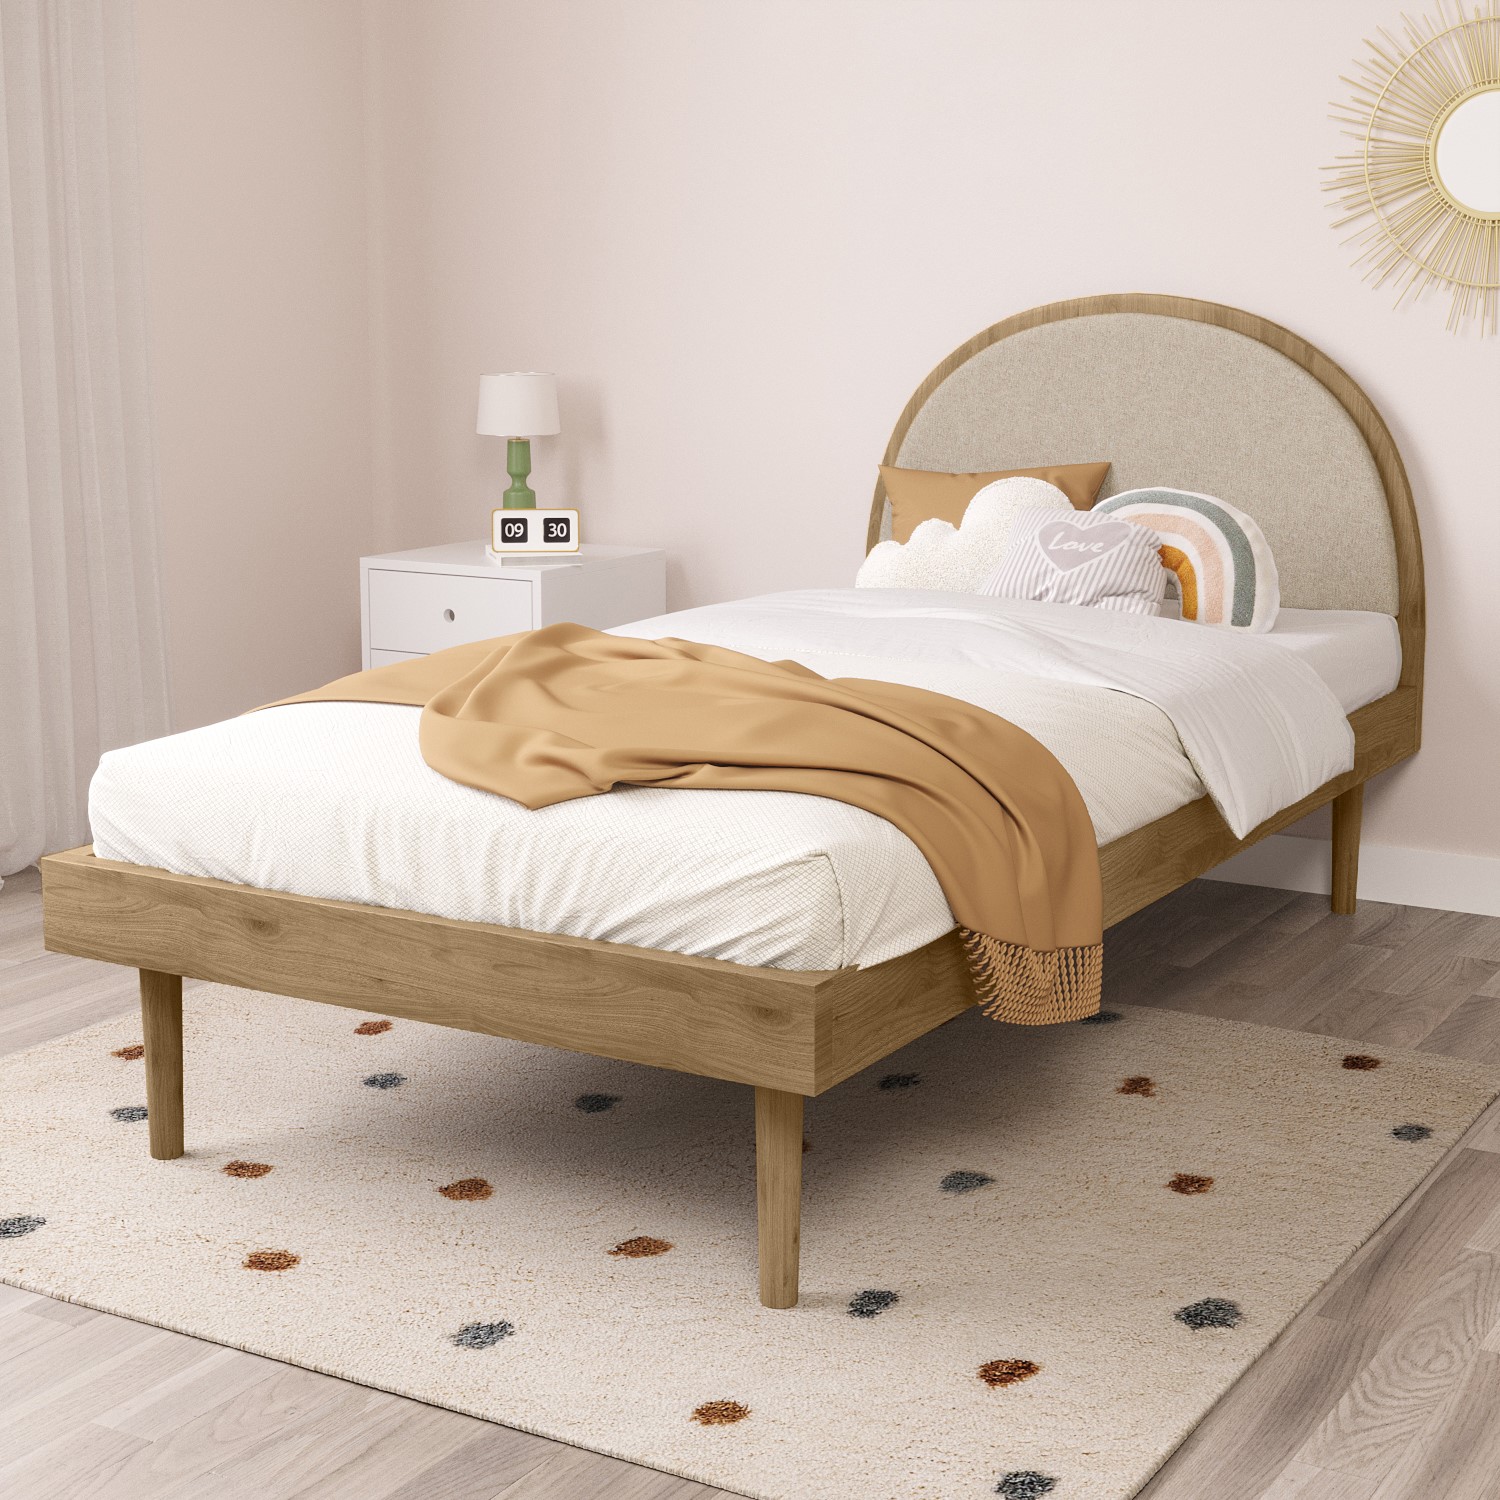 Photo of Single wooden bed frame with beige linen headboard - cara